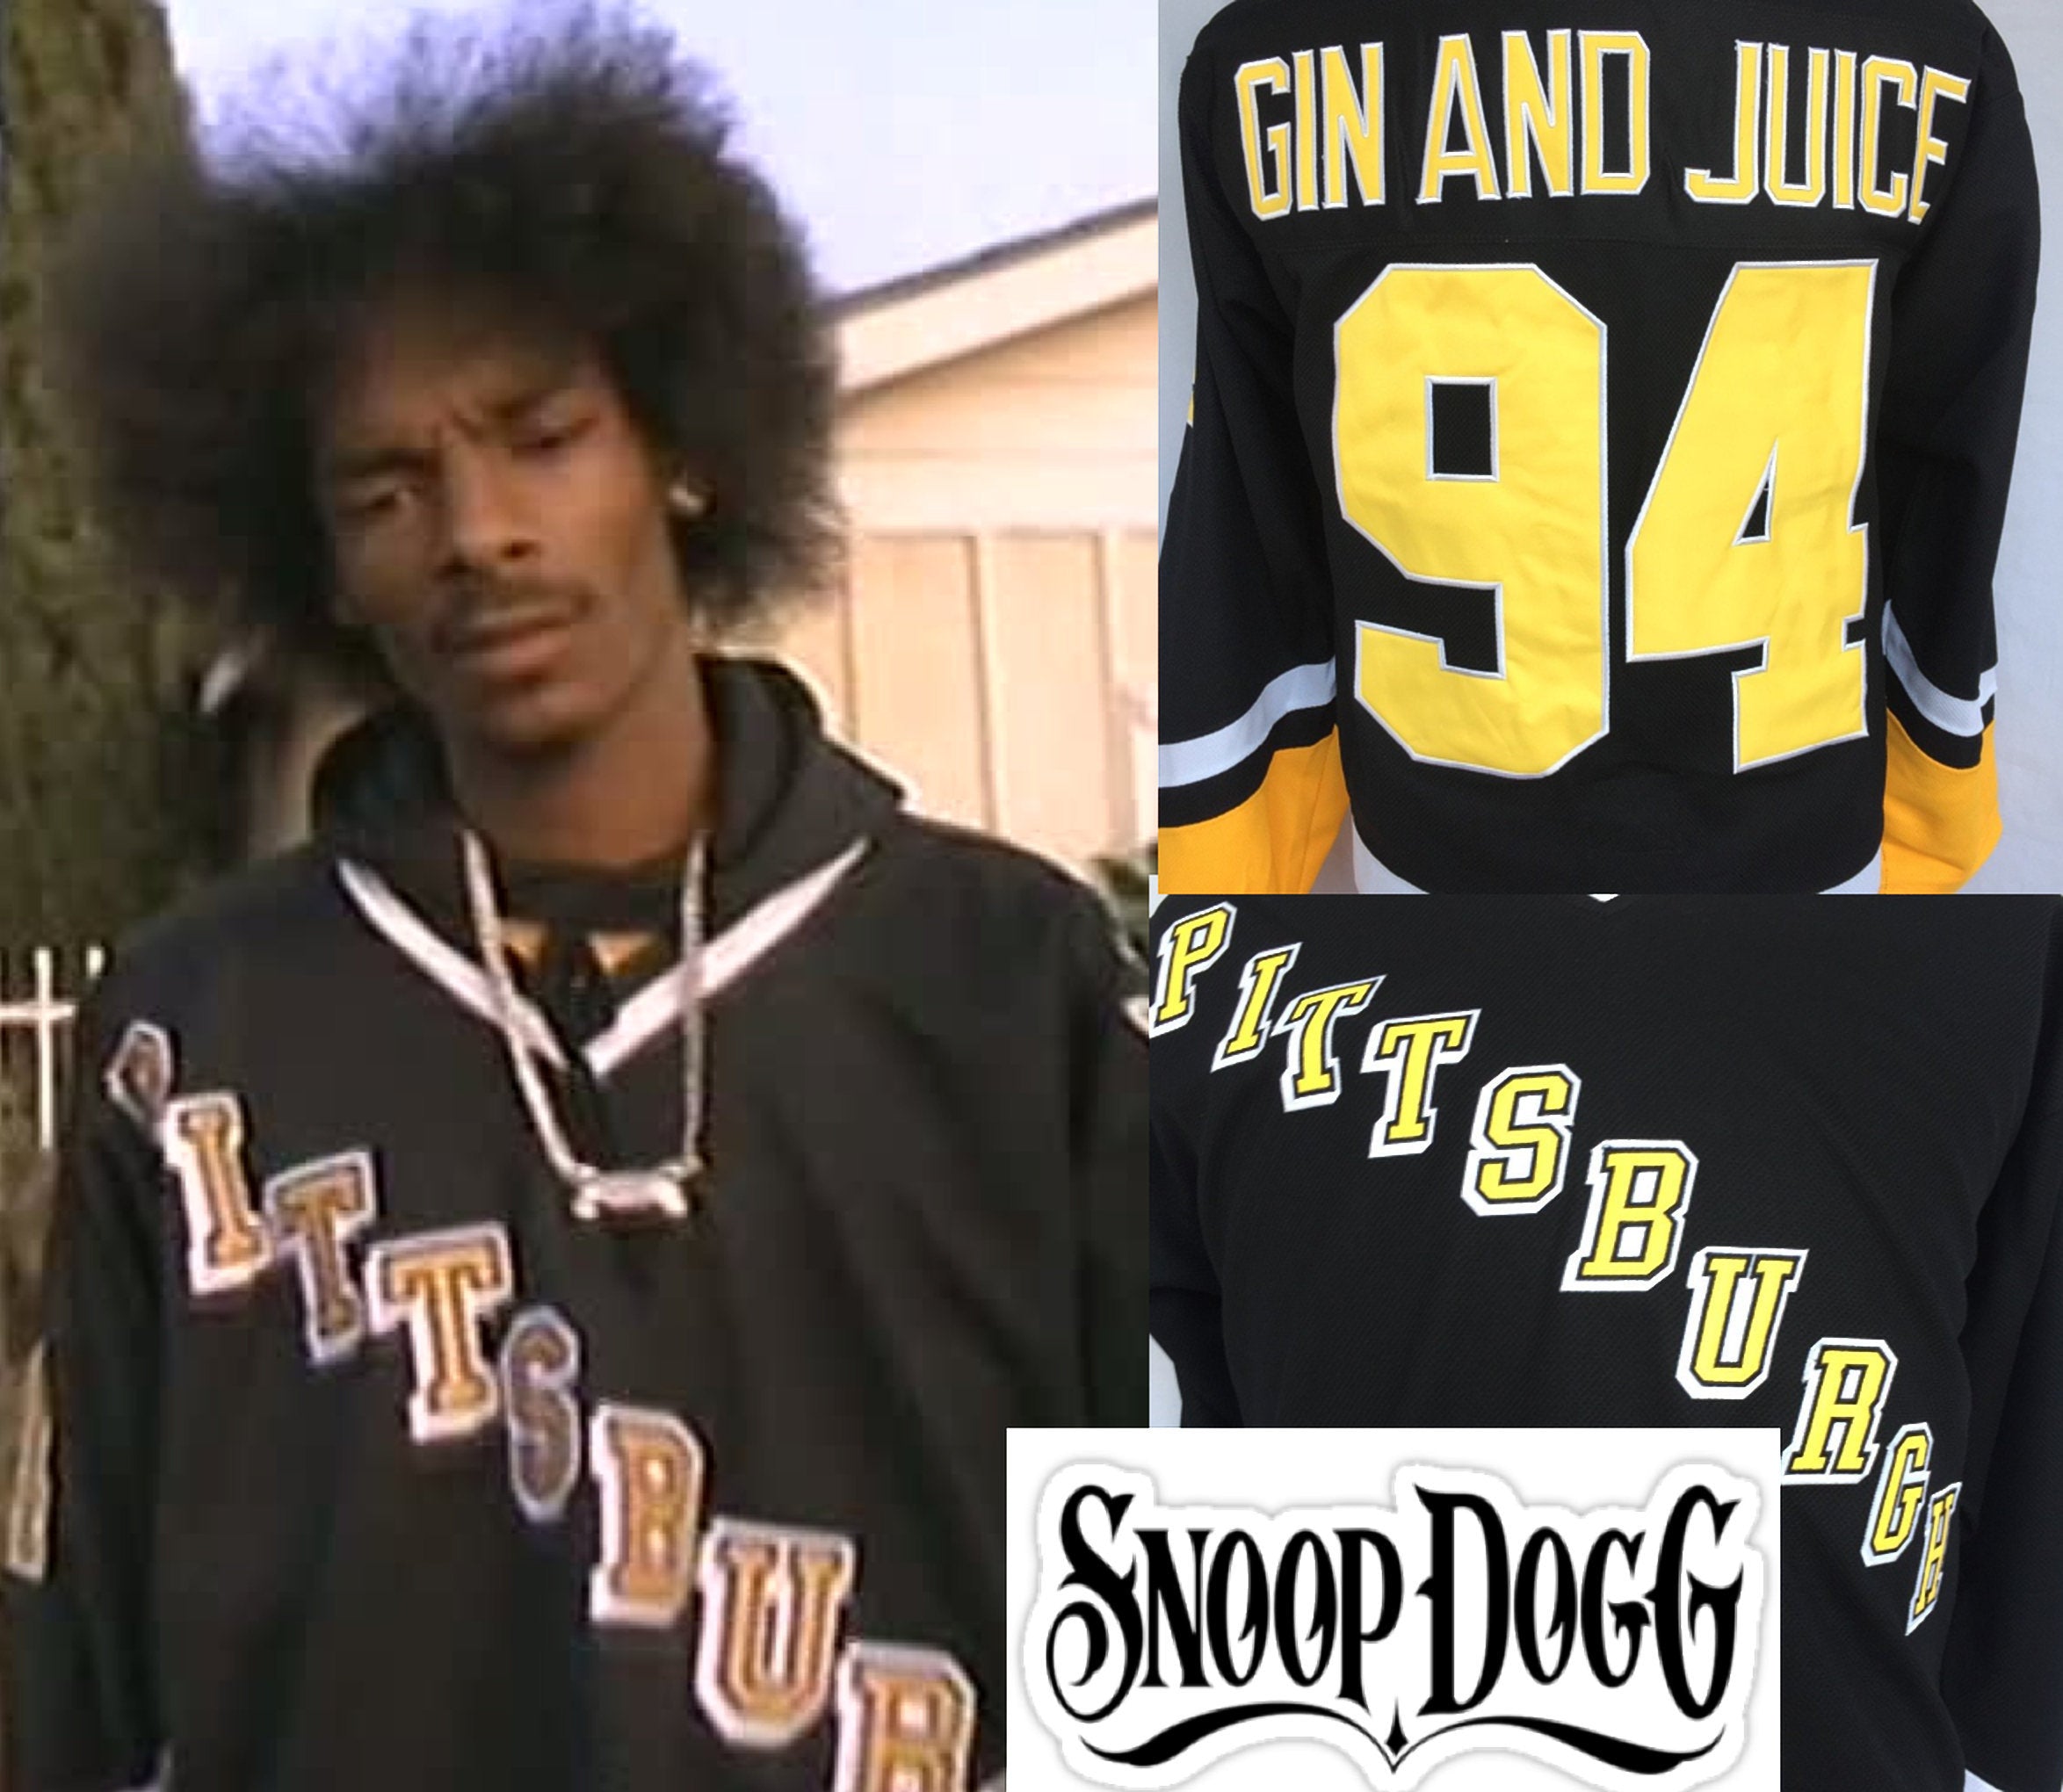 Mens Snoop Doggy Dogg #94 GIN AND JUICE Pittsburgh Penguins Jerseys  Stitched Black #18 Happy Gilmore Boston Bruins Film Hockey Jersey S 3XL  From Mickisportsjerseys, $28.22